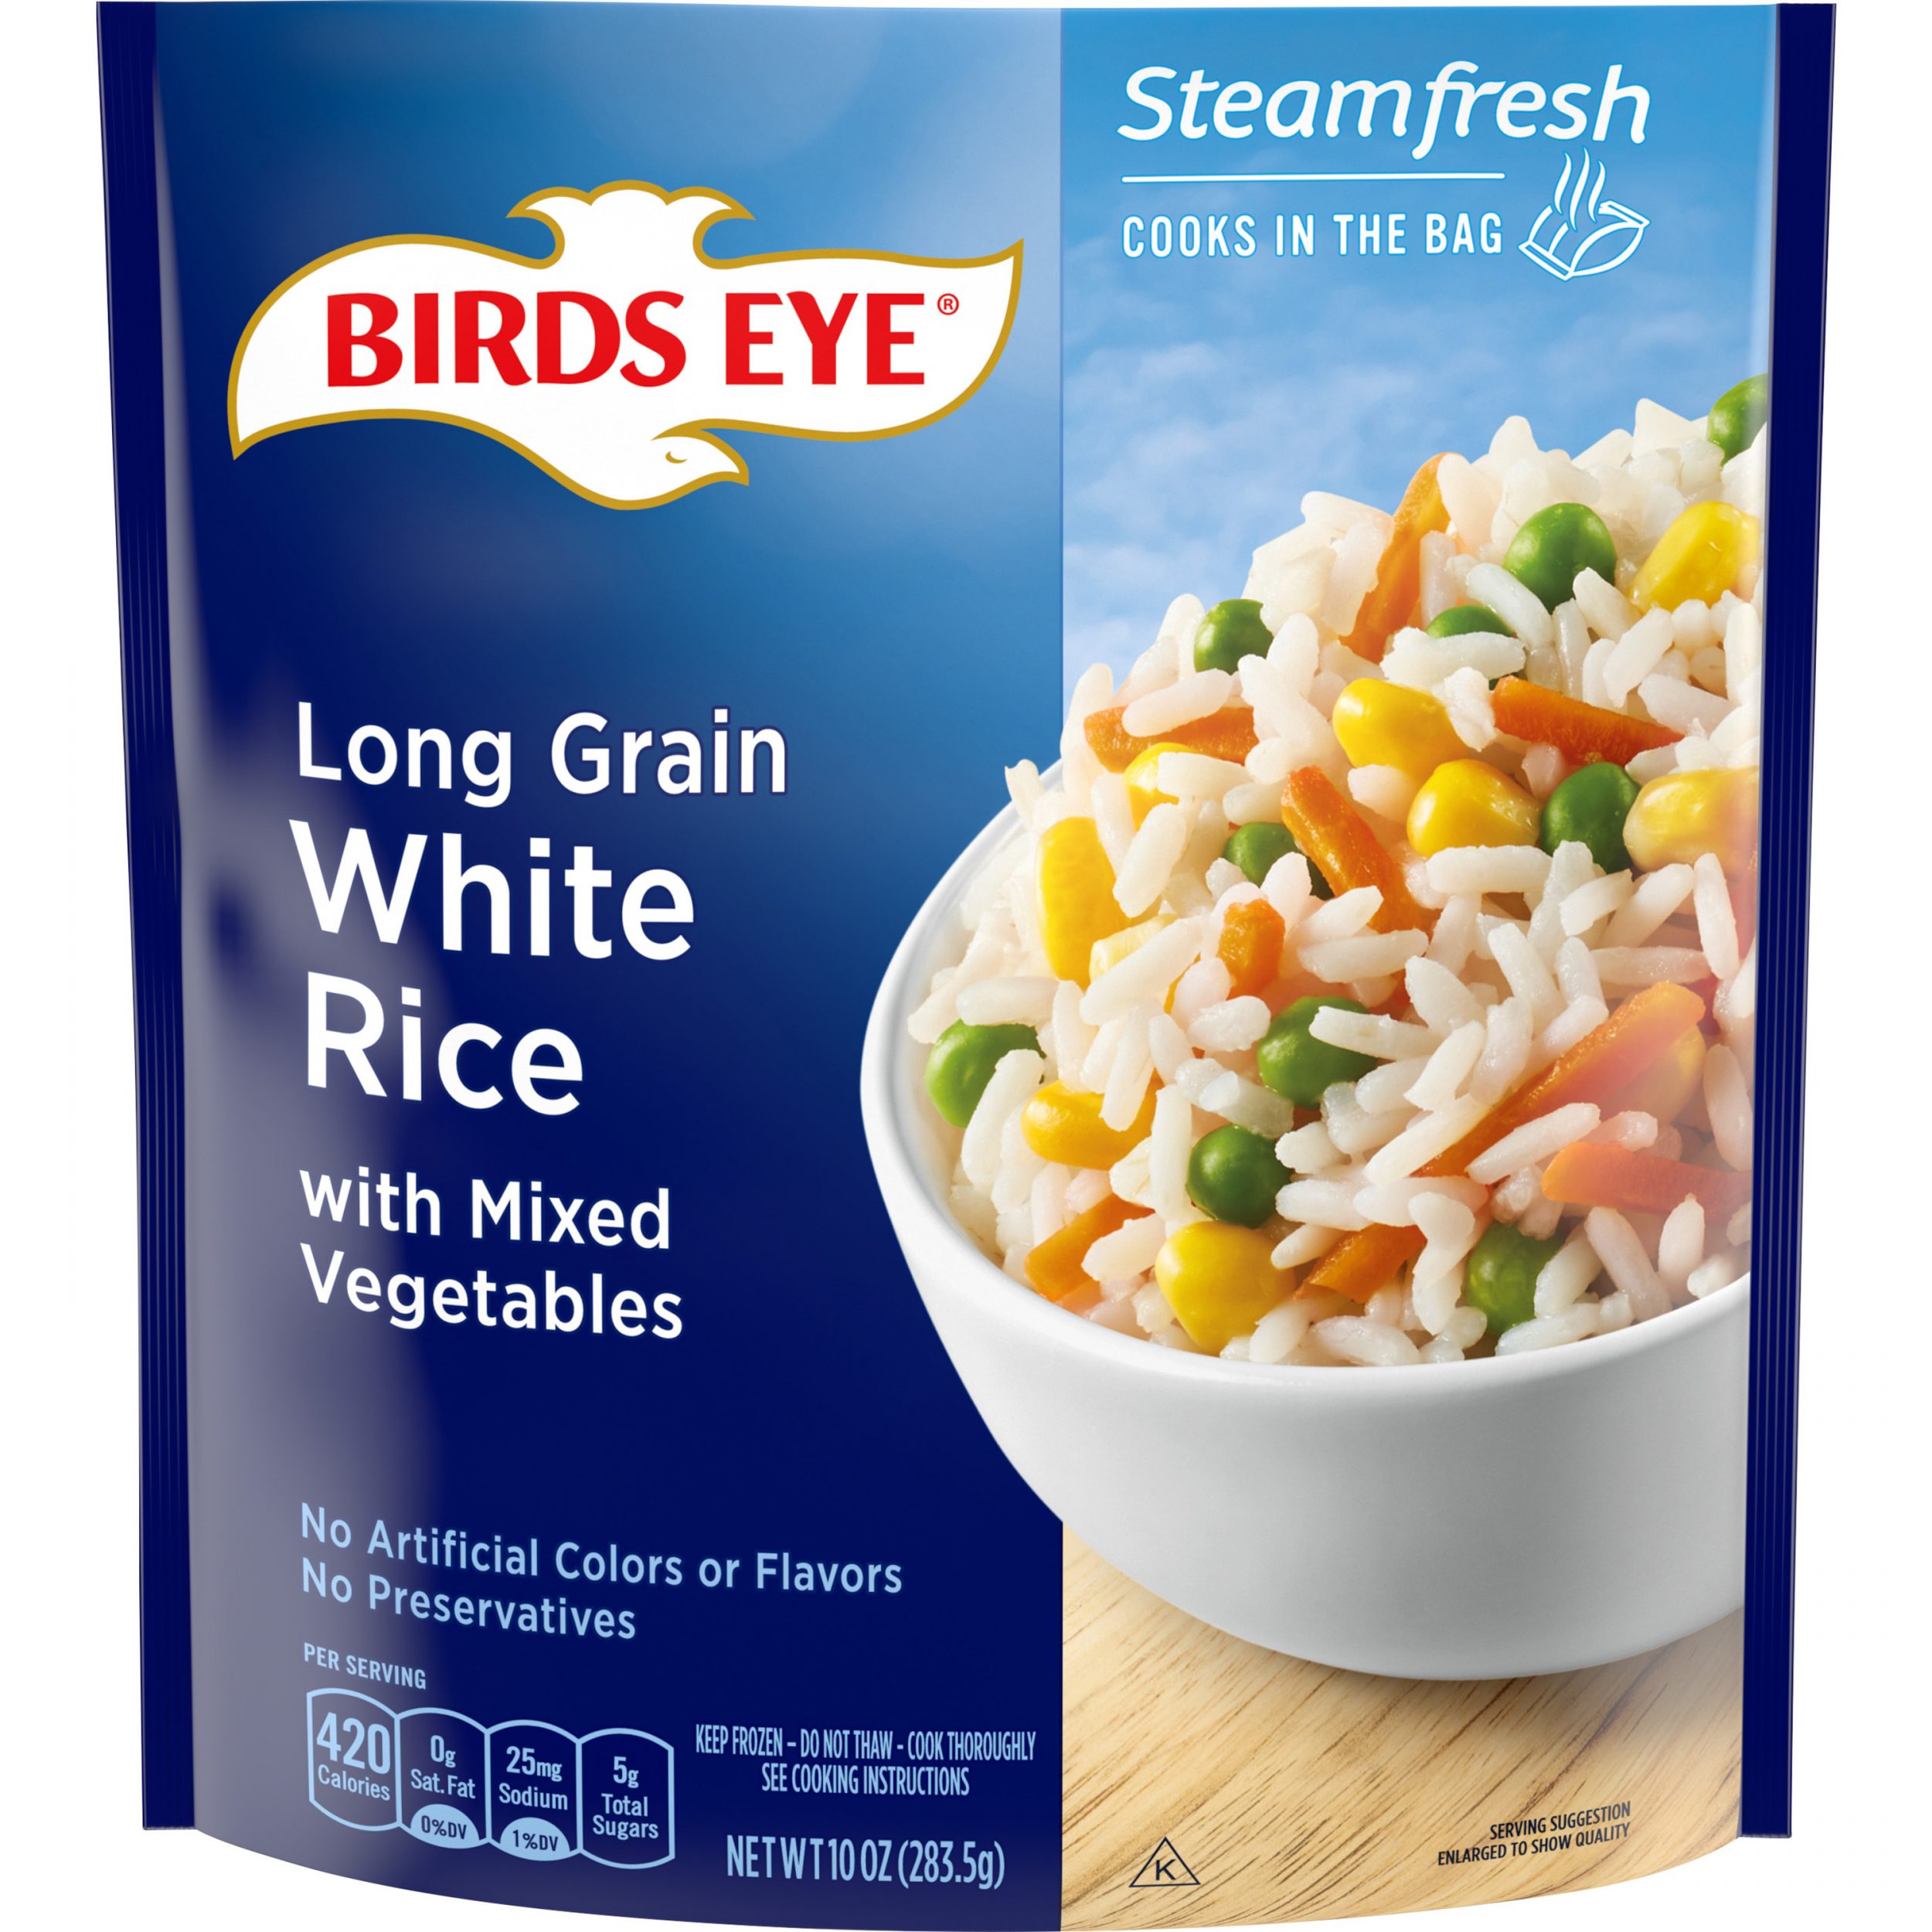 Birds Eye Steamfresh Selects Long Grain White Rice with Mixed Vegetables